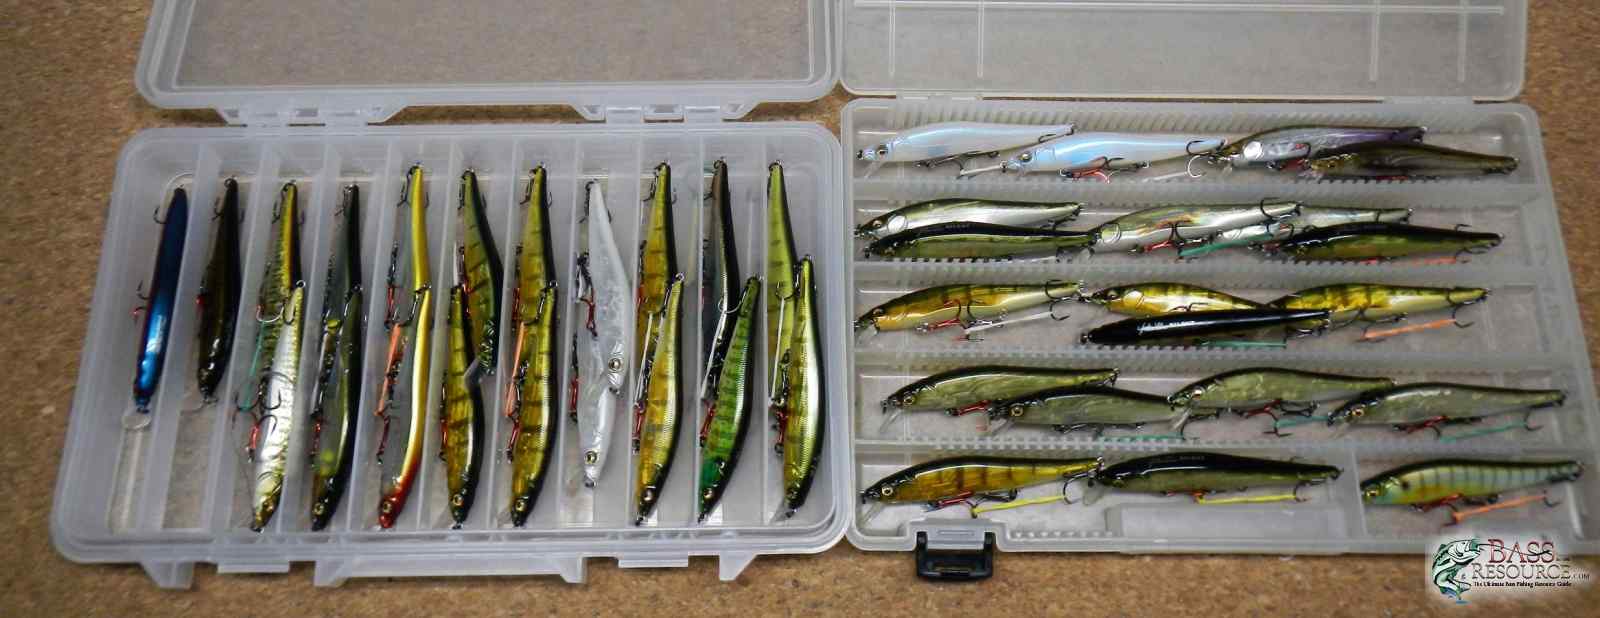 Most bass in 2023: Which lure? - Fishing Tackle - Bass Fishing Forums